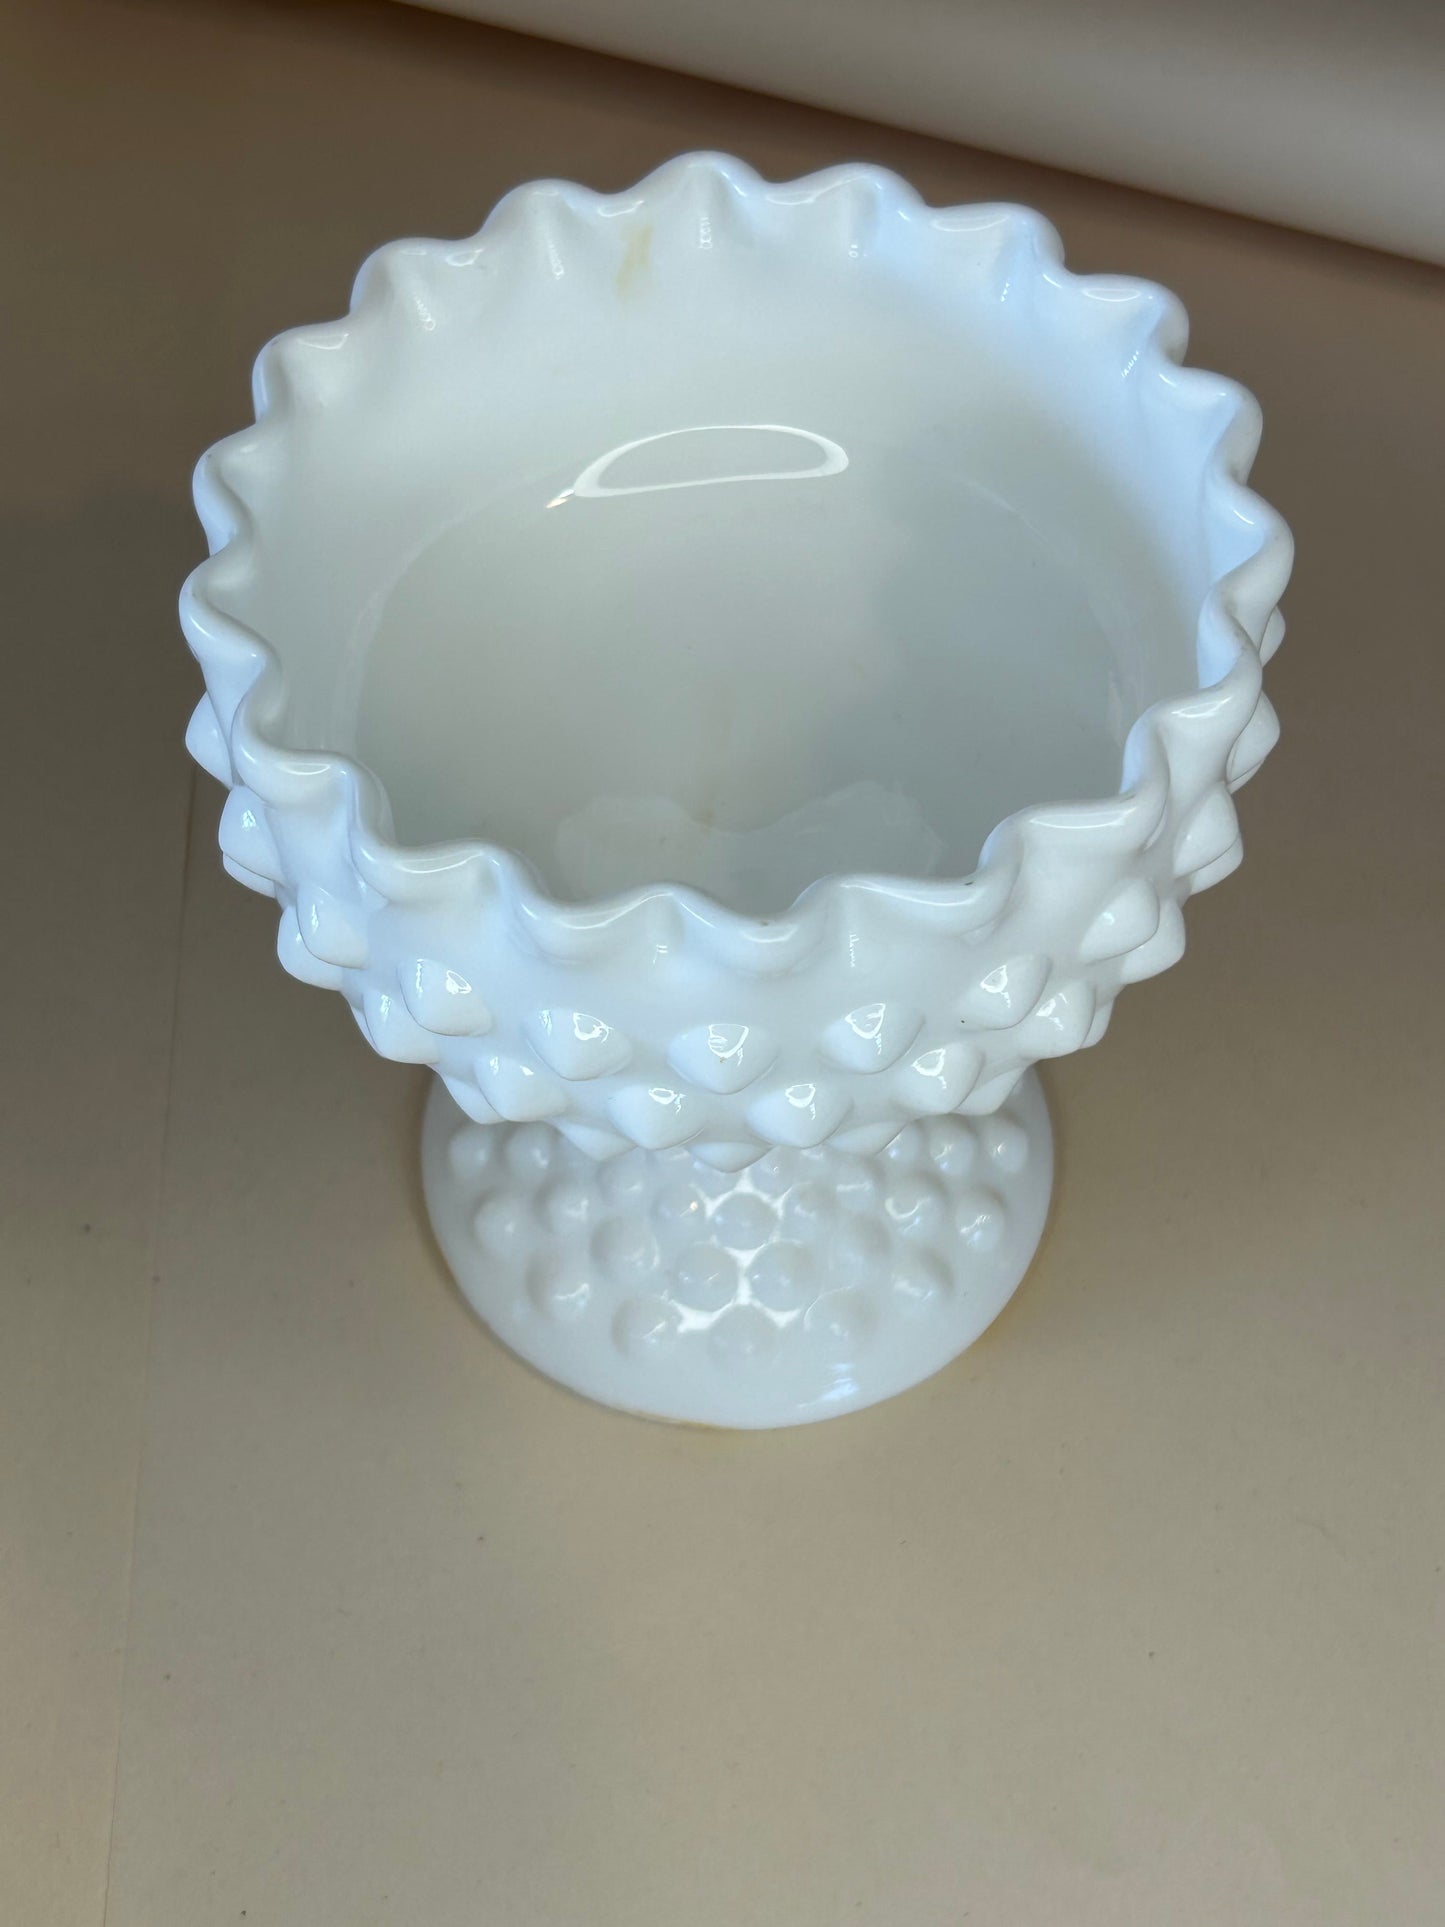 Vintage Milk Glass Hobnail Round Footed Compote Candy Dish - Excellent Condition